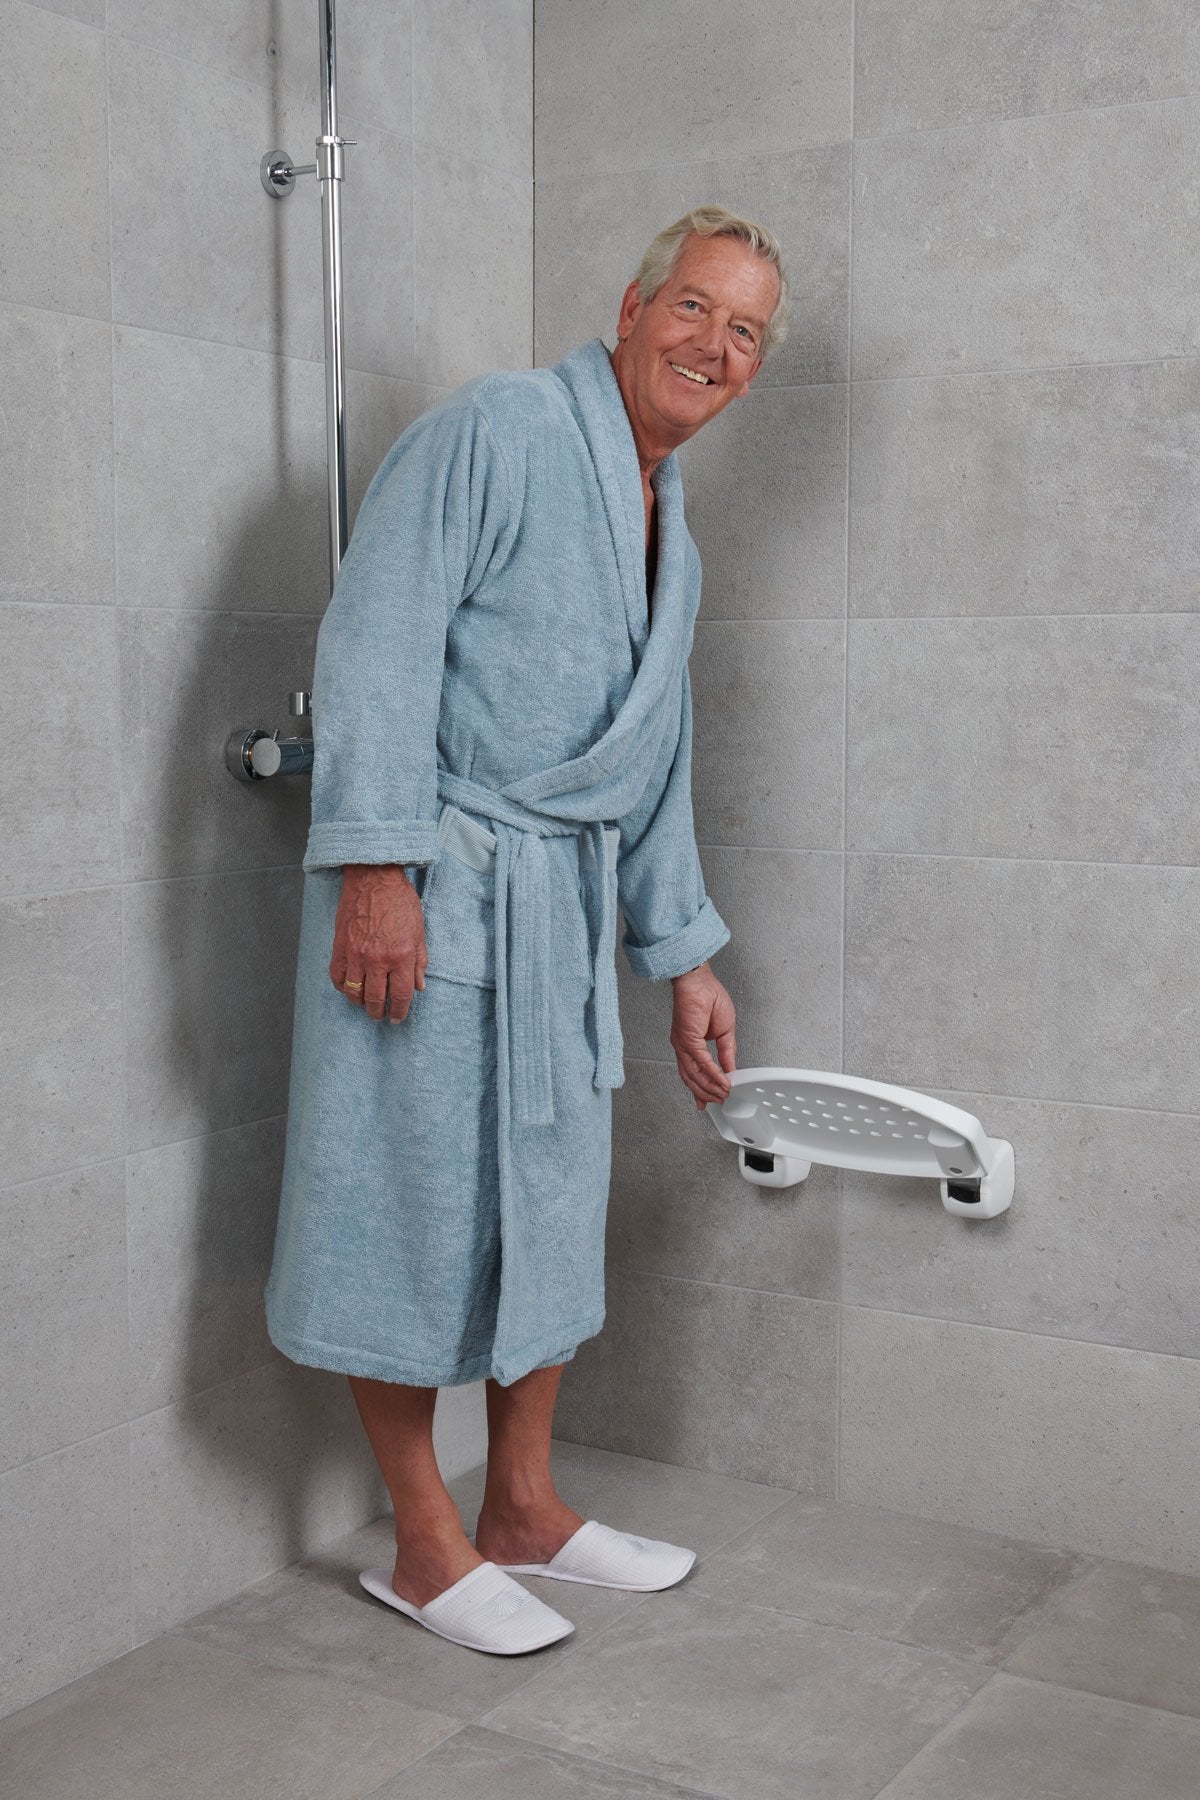 SecuCare Foldable shower seat